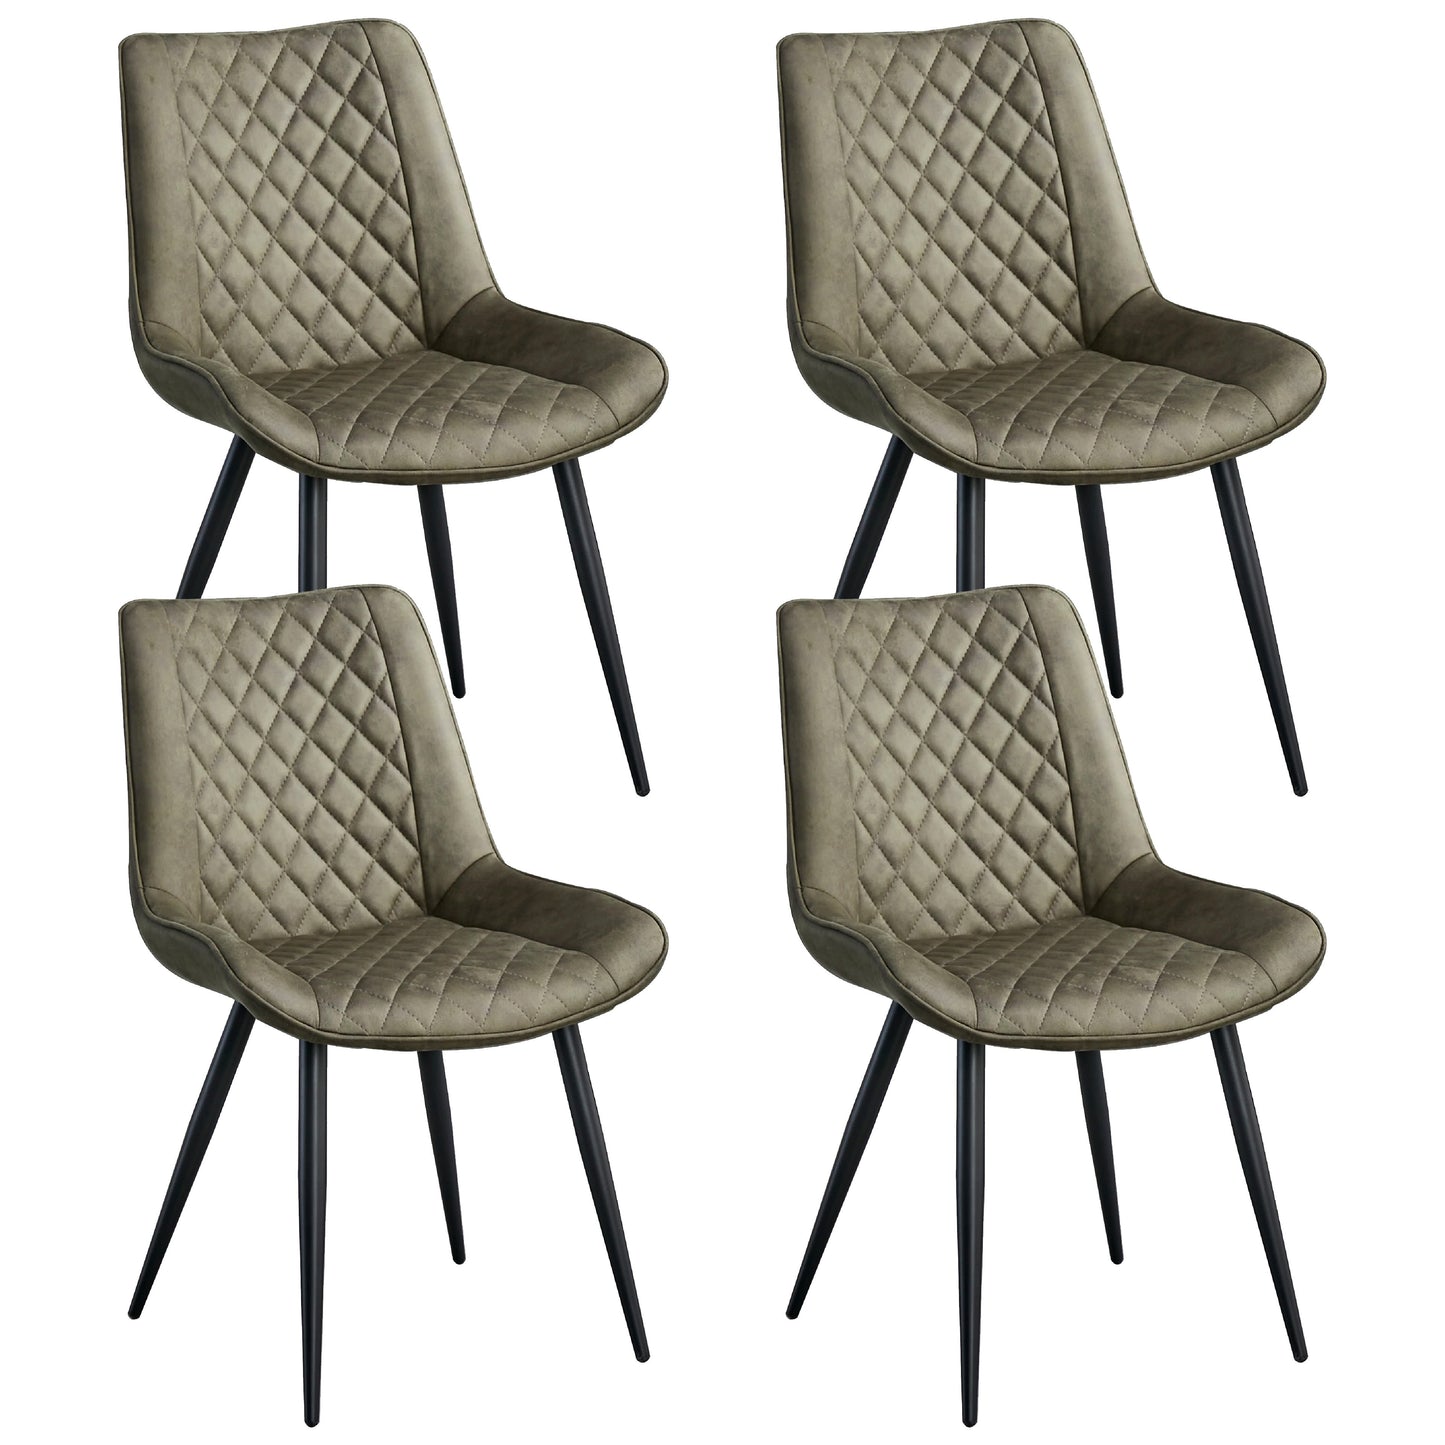 Tyler Olive Green Set of 4 Fabric Chairs